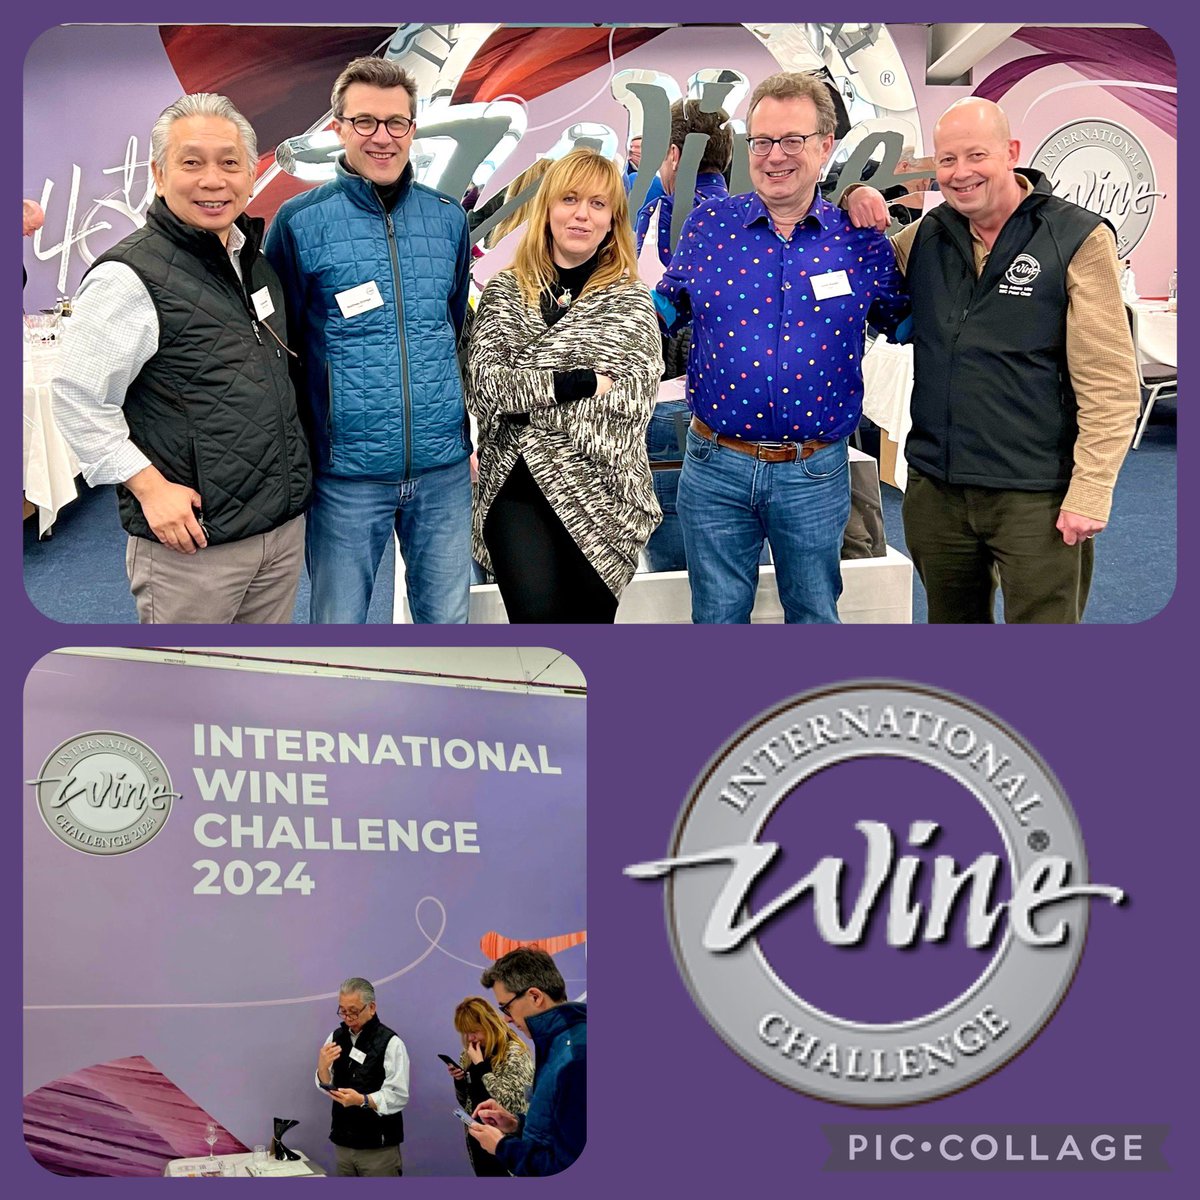 IWC Table 18, great blend of judges (English, American, French, Italian & Japanese) started with sparkling wine from Japan and finished with Icewine from Canada! 

#internationalwinechallenge #japanesecuisinegoodwillambassador #internationaldrinksspecialists #dipwset #wsetdiploma